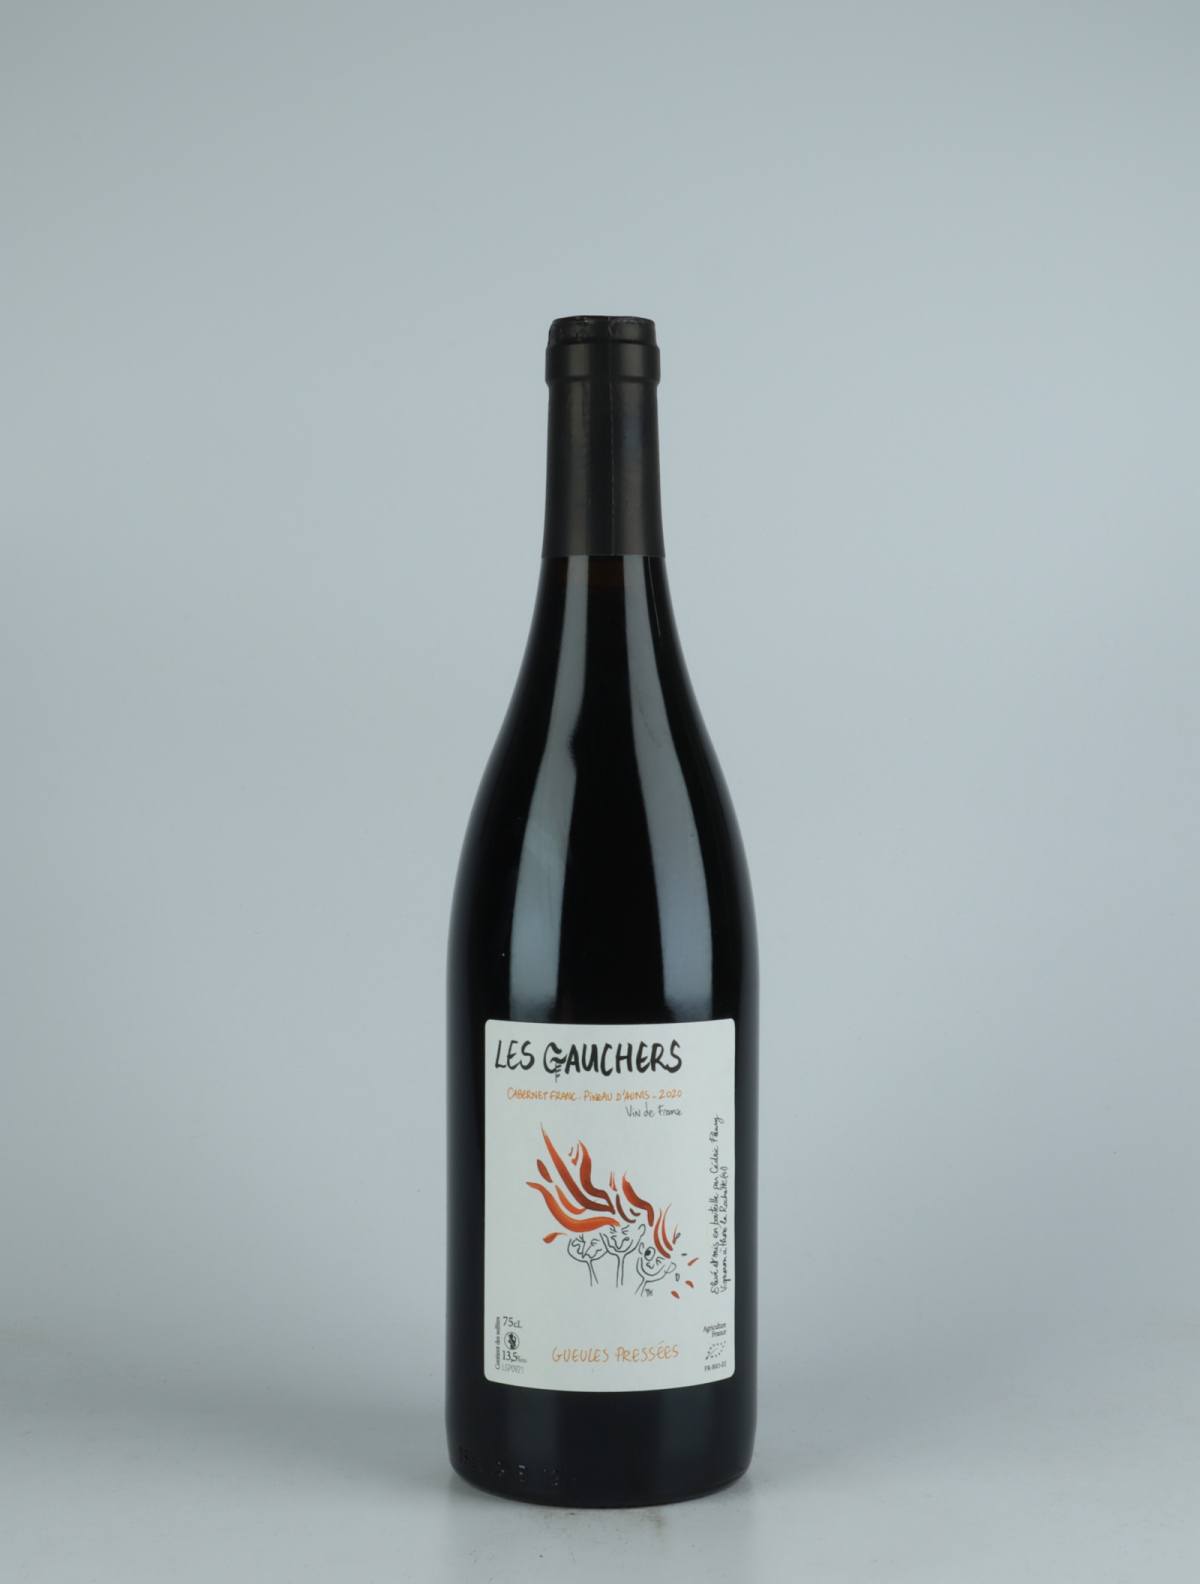 A bottle  Gueules Pressées Red wine from Les Gauchers, Loire in France